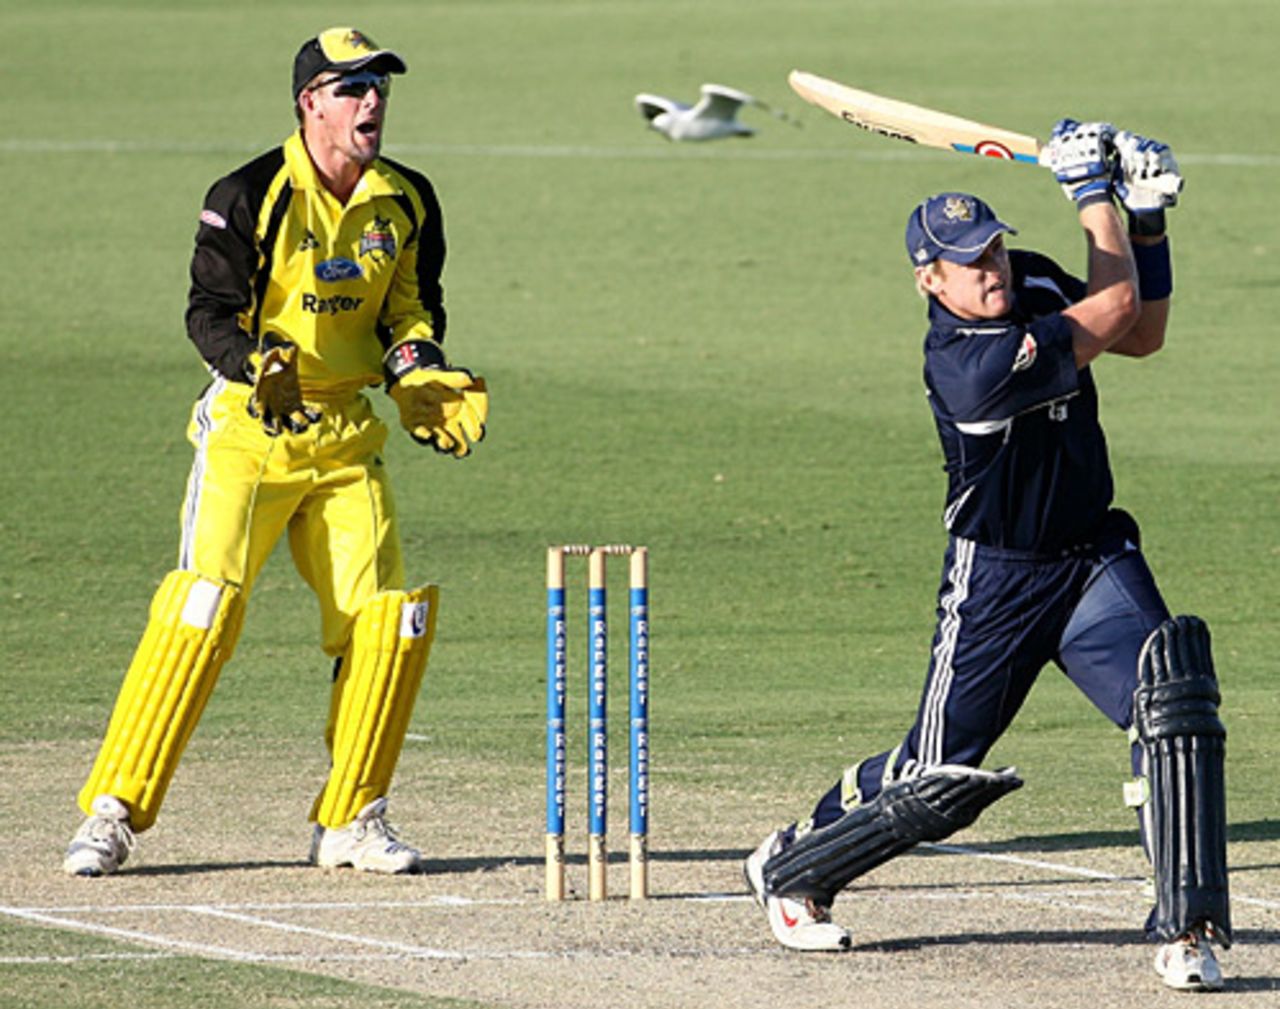 Cameron White drives over the top, Western Australia v Victoria, Ford Ranger Cup, Perth, February 2, 2008